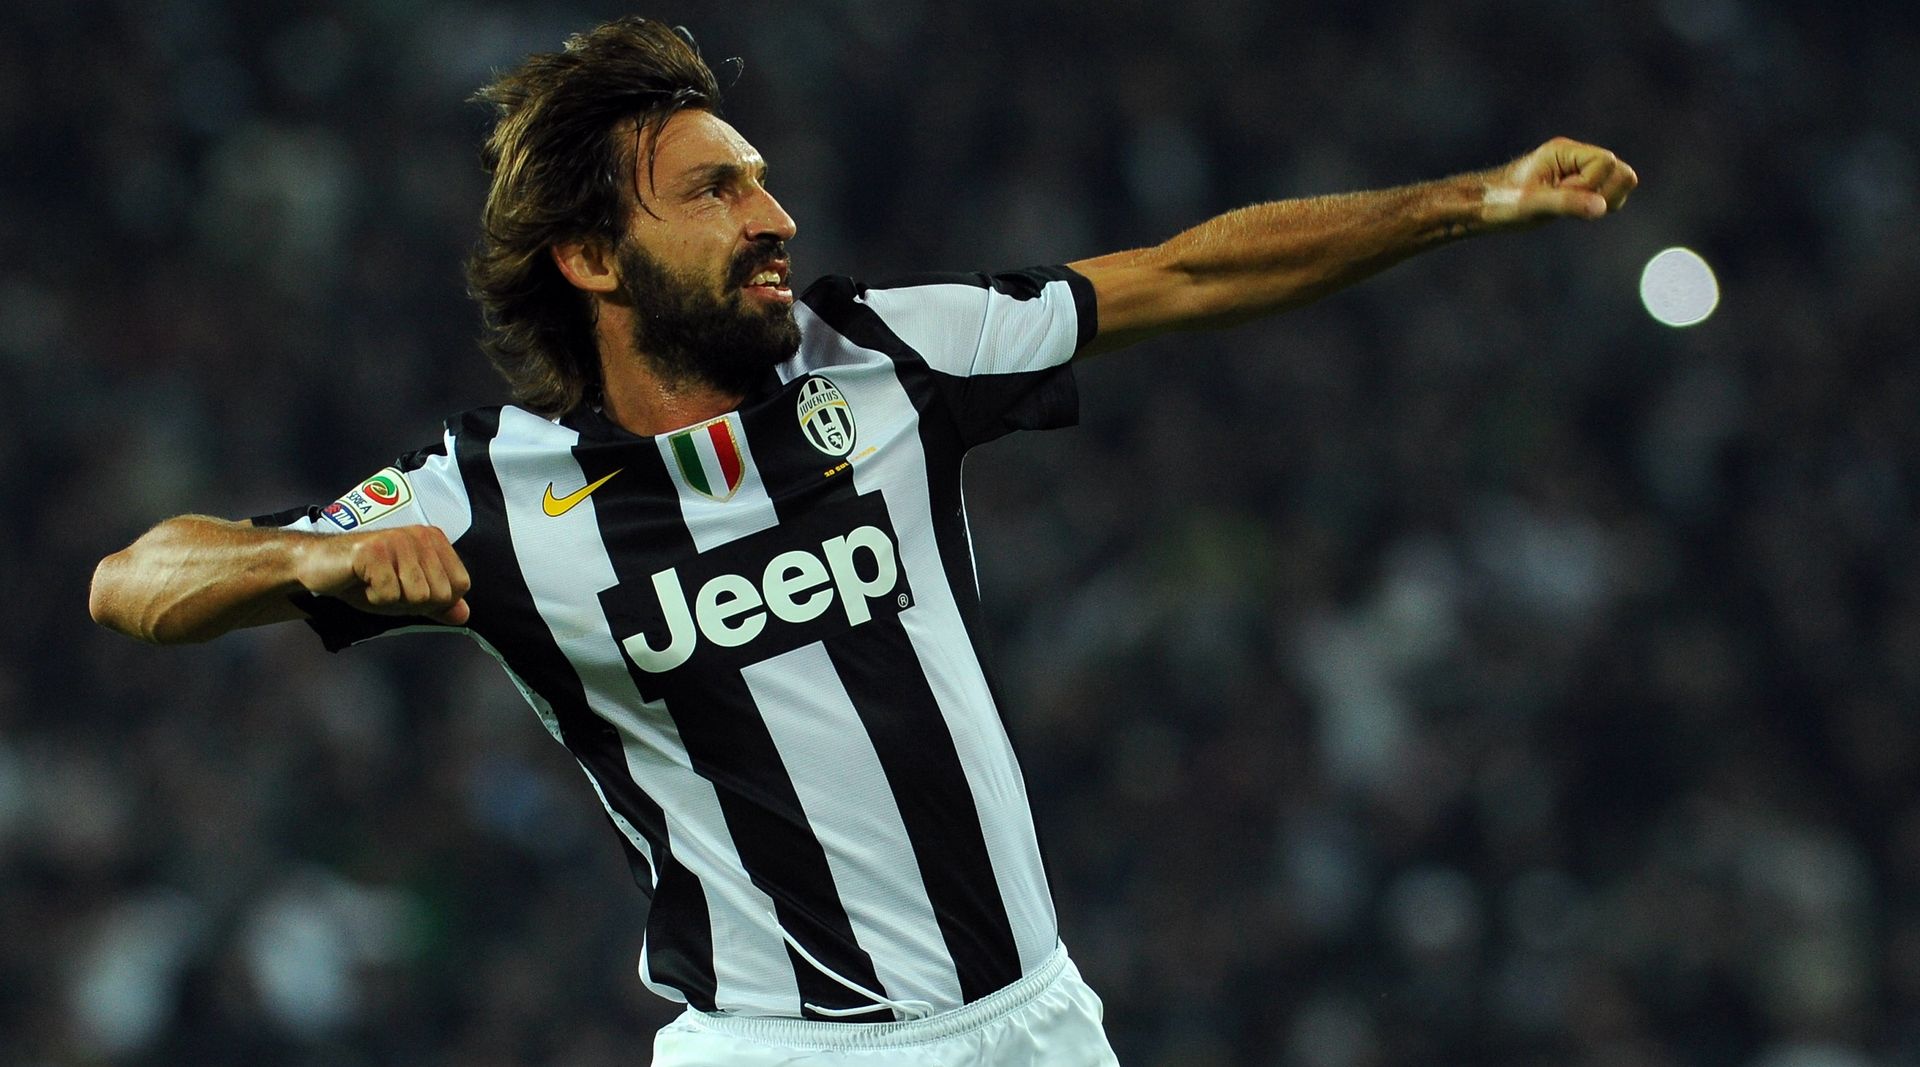 <p>                     Andrea Pirlo left Serie A midway through the 10s to wind down his career in MLS, but he did enough during the first half of the decade to take top spot on this list.                   </p>                                      <p>                     The Panenka-taking playmaker’s metronomic midfield magic was poetry in motion, as fans of AC Milan, Juventus – with both of whom he won the Scudetto – and more will attest.                   </p>